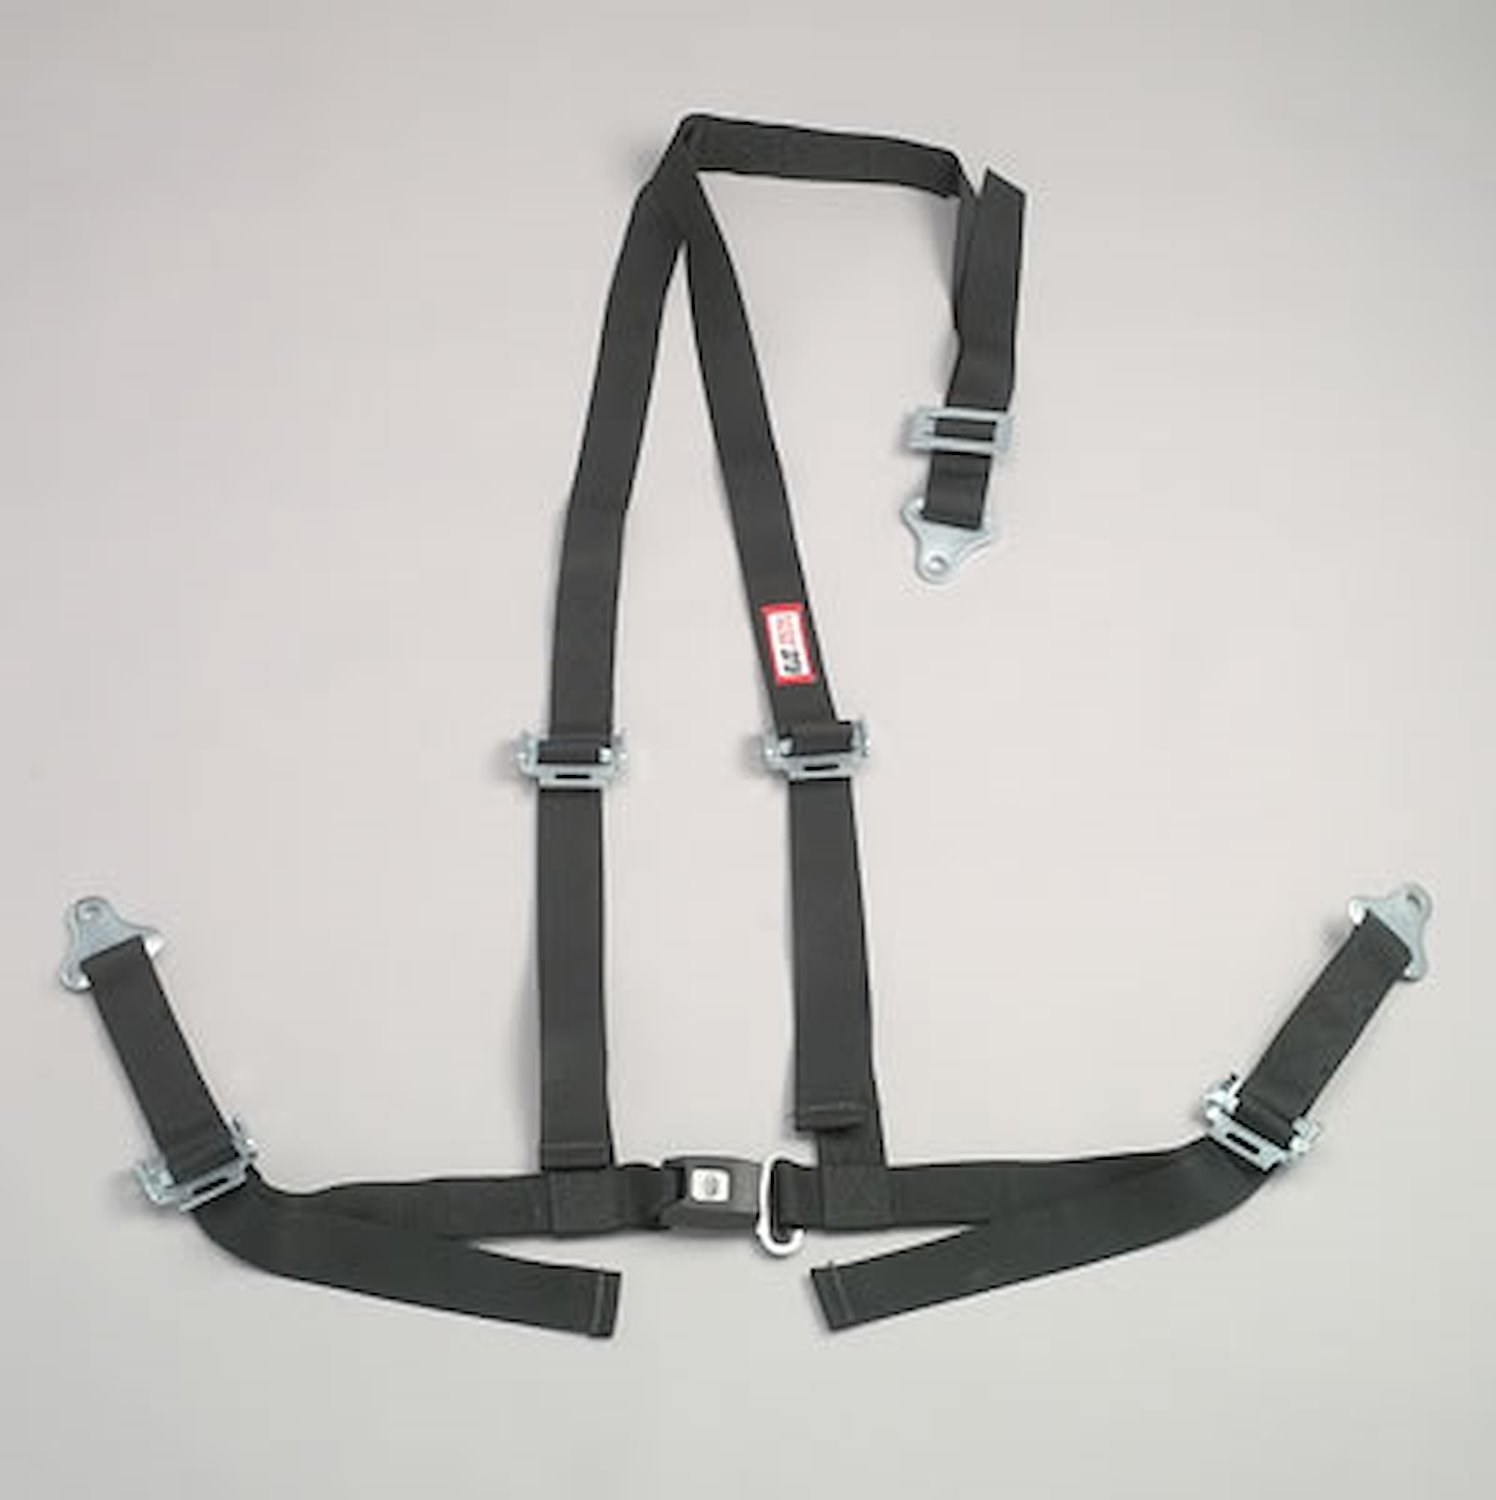 NON-SFI B&T HARNESS 2 PULL UP Lap Belt 2 S. H. Individual ROLL BAR Mount ALL WRAP ENDS ORANGE